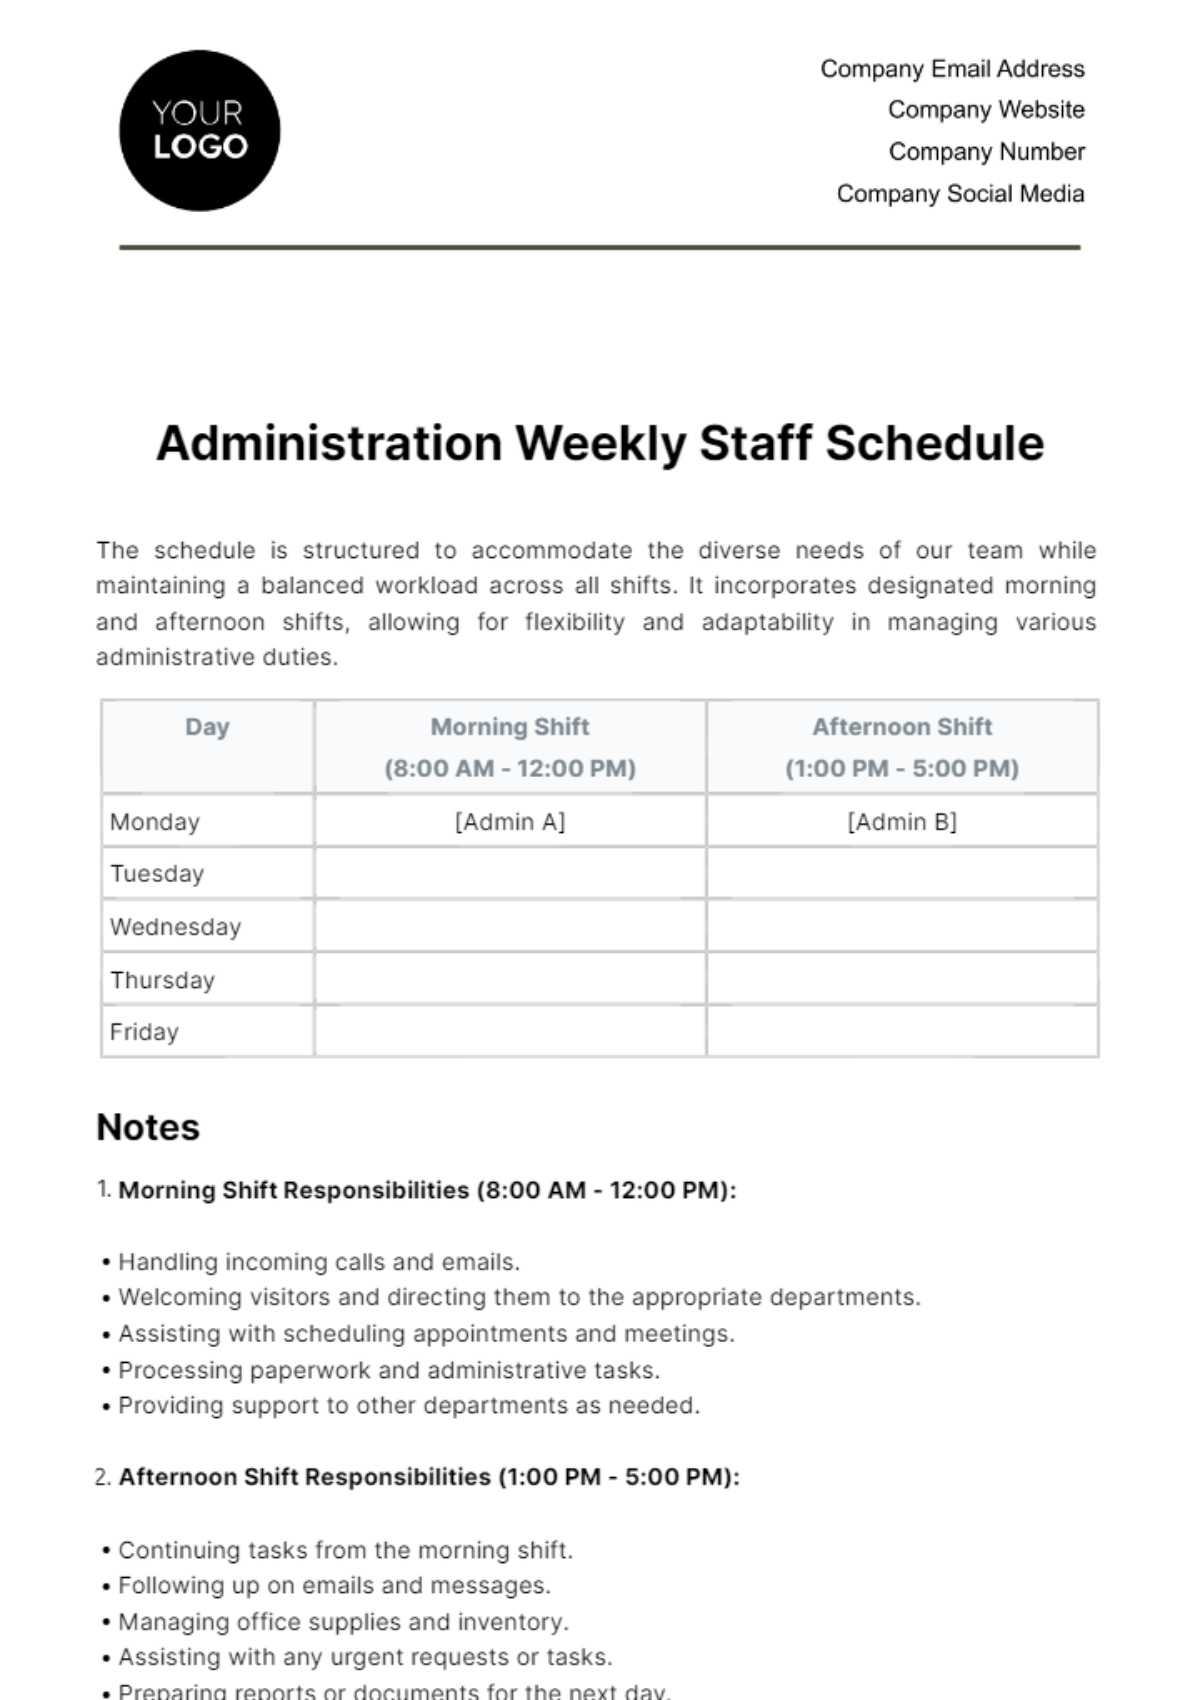 Administration Weekly Staff Schedule Template